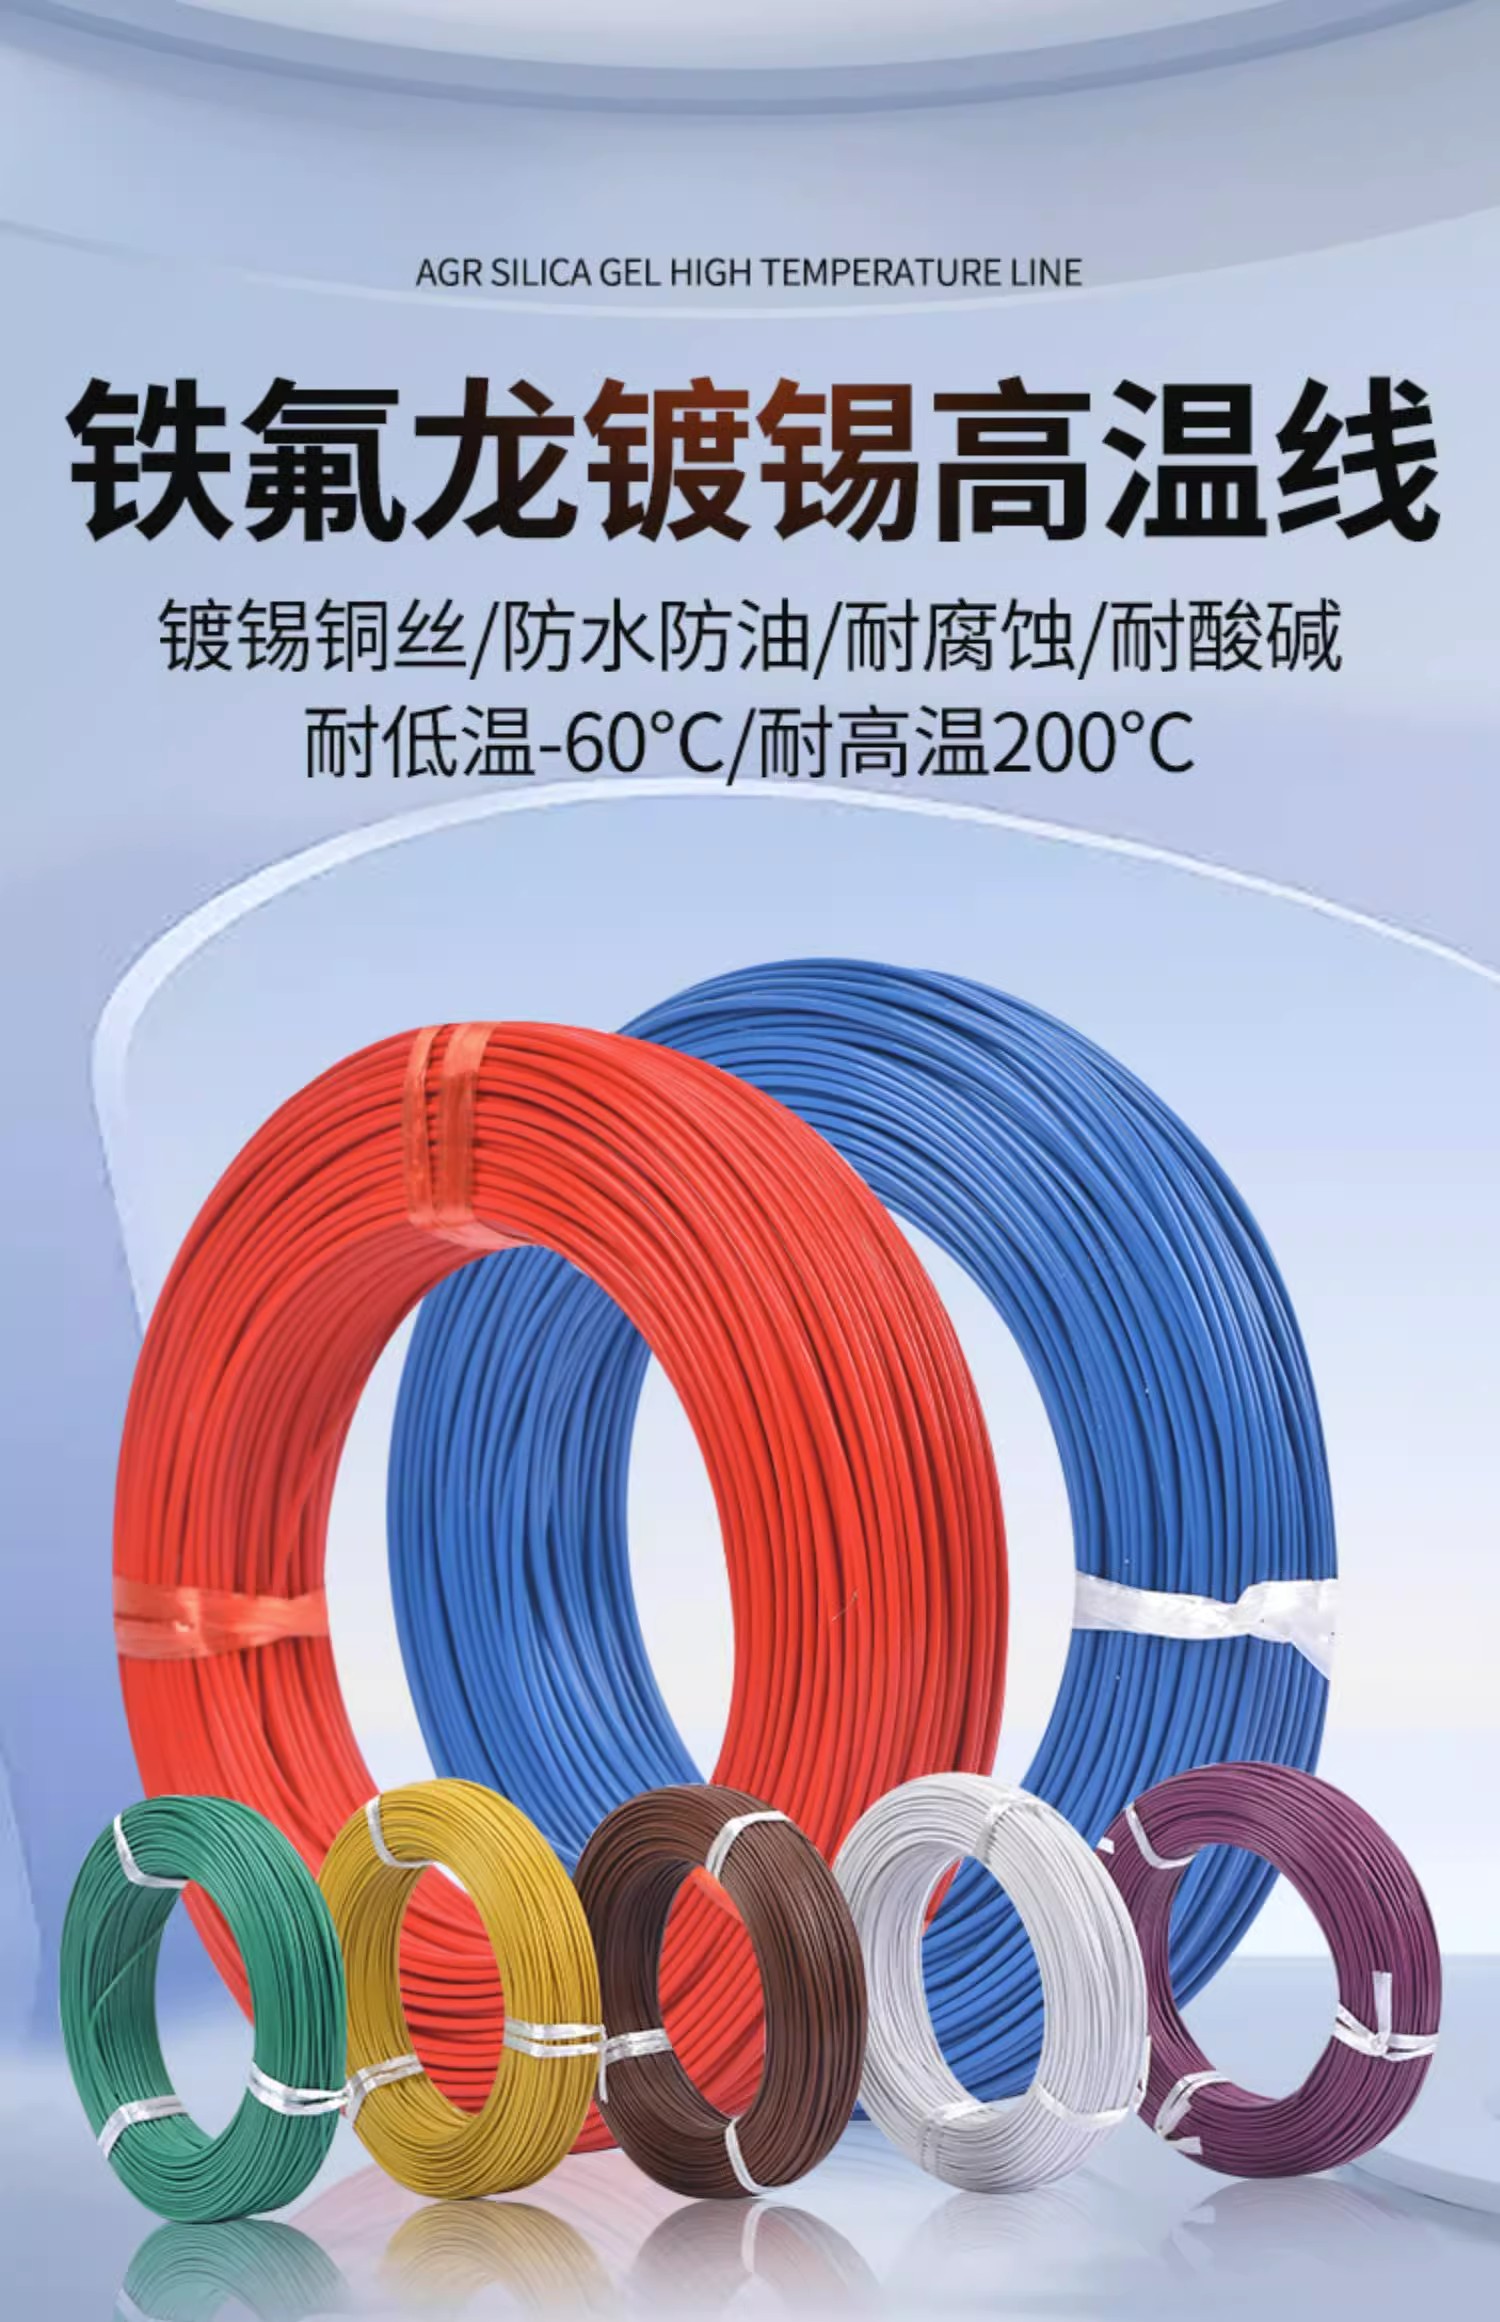 Supply AF200 Teflon high-temperature wire, galvanized copper core, high-temperature resistant wire and cable, electrical vehicle connection wire